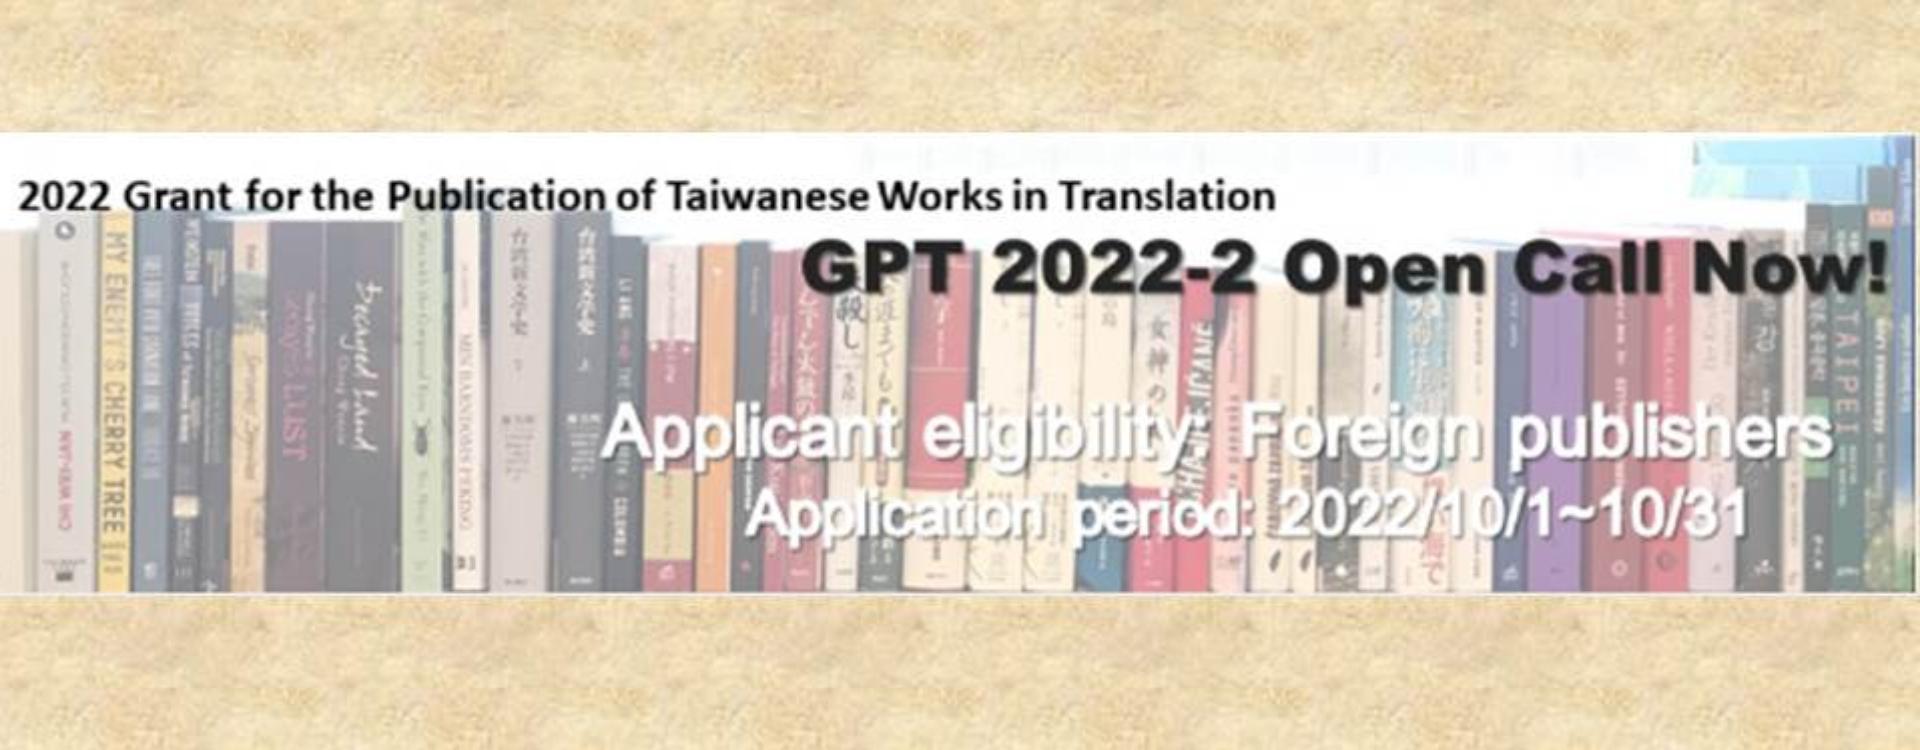 2022 Grant for the Publication of Taiwanese Works in Translation Open Call Now